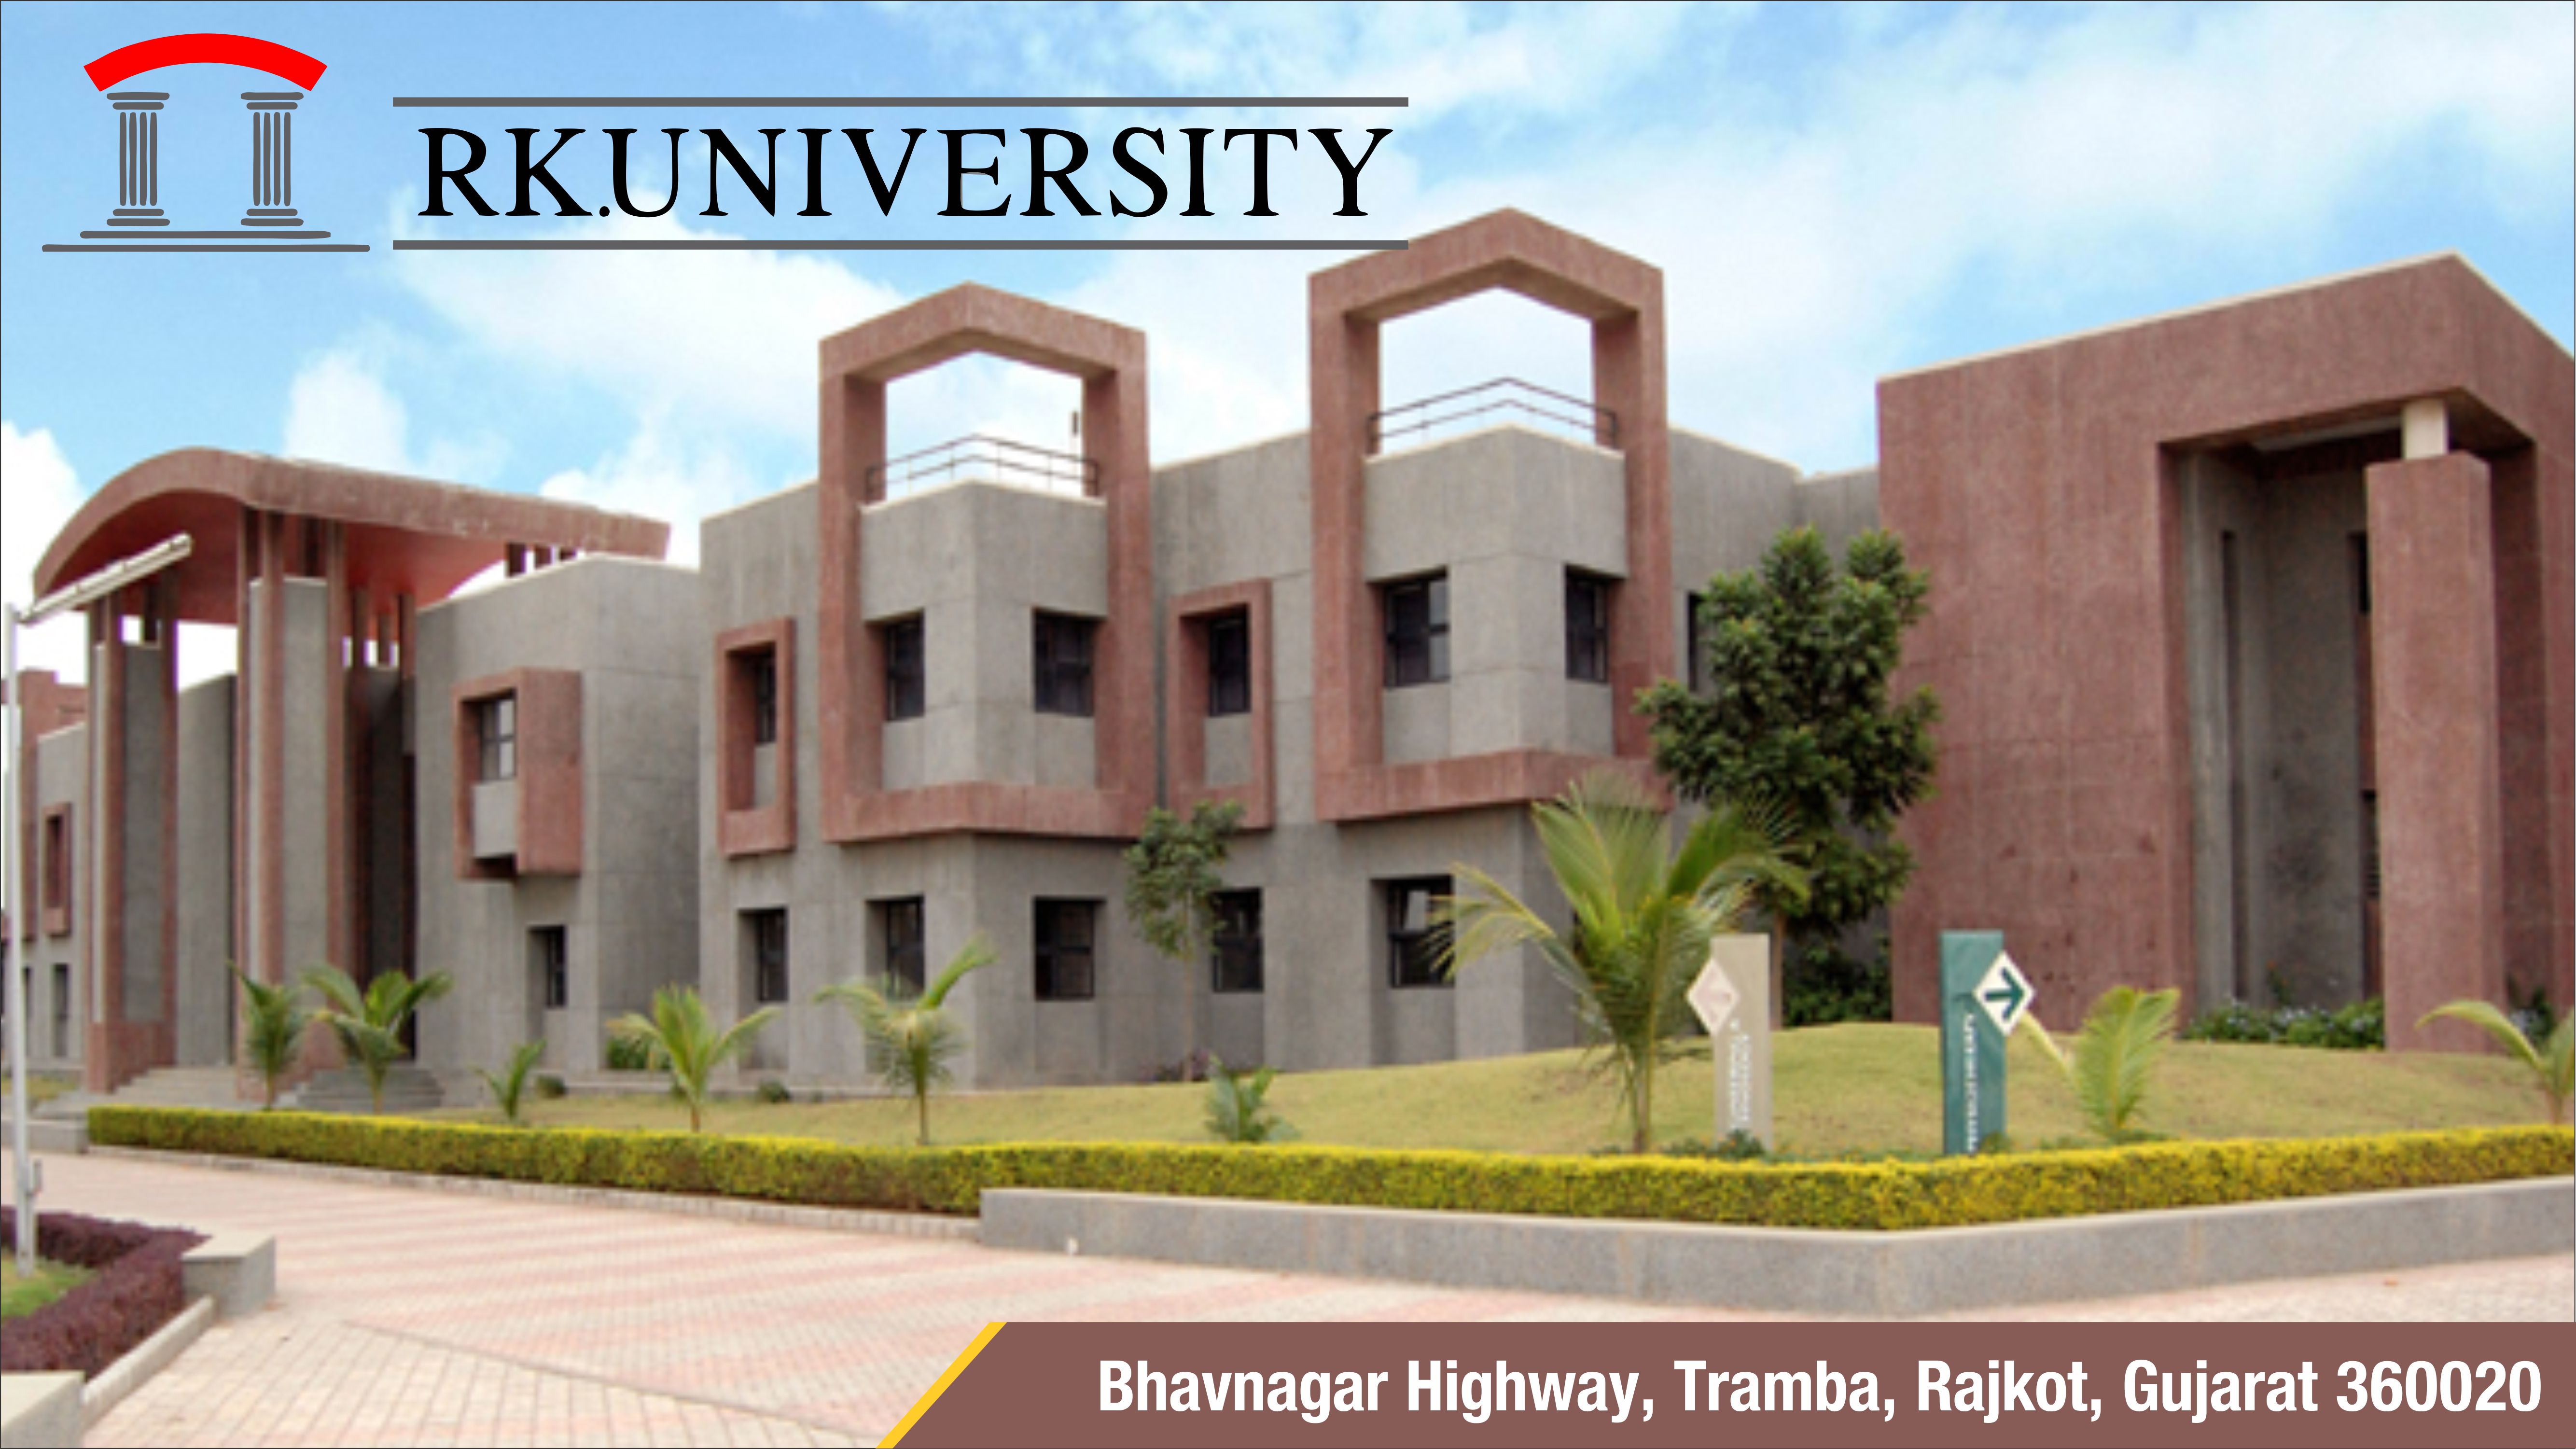 out side view of RK UNIVERSITY